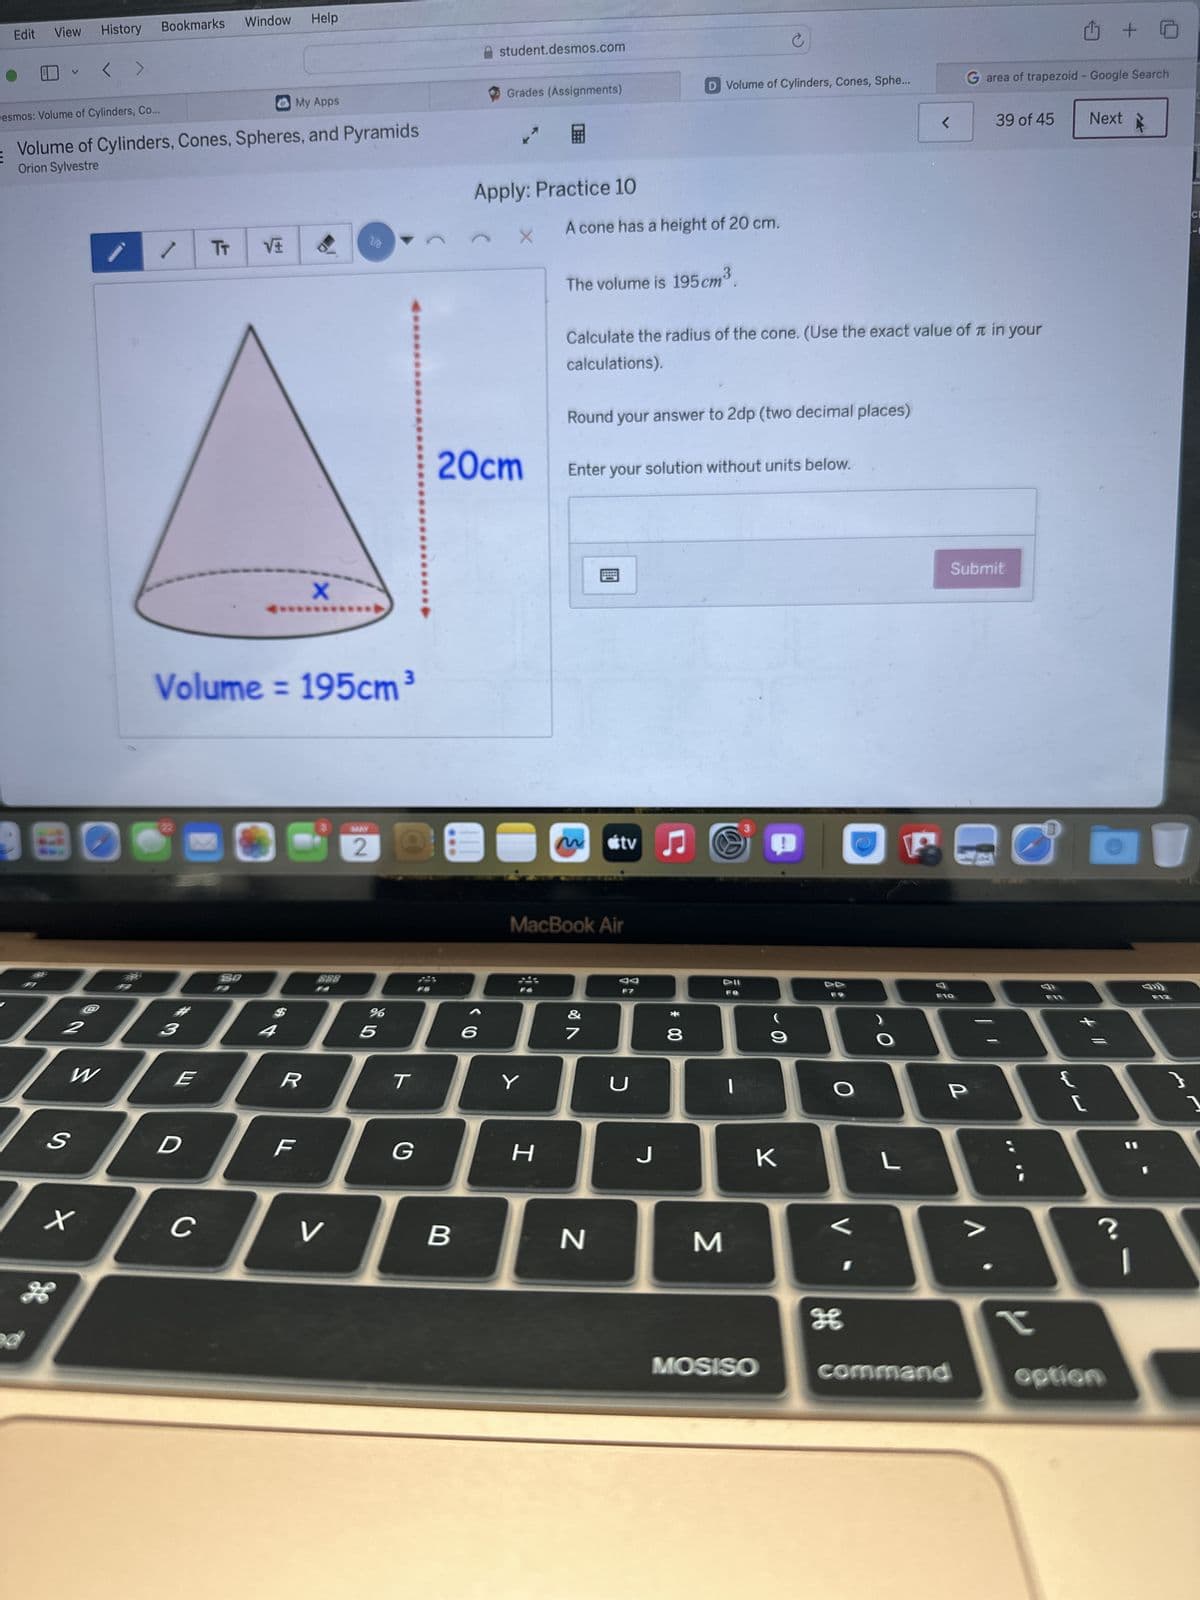 Edit
View History
Bookmarks Window
Help
V
< >
Desmos: Volume of Cylinders, Co...
My Apps
Volume of Cylinders, Cones, Spheres, and Pyramids
Orion Sylvestre
-
TT
X
Volume=195cm³
BD
$
BBB
BBA]
2
4
student.desmos.com
C
凸 + 5
Grades (Assignments)
D Volume of Cylinders, Cones, Sphe...
G area of trapezoid - Google Search
<
39 of 45
Next
民
Apply: Practice 10
X
A cone has a height of 20 cm.
The volume is 195 cm³.
Calculate the radius of the cone. (Use the exact value of it in your
calculations).
Round your answer to 2dp (two decimal places)
20cm
Enter your solution without units below.
MAY
2
00
M tv♫
%
805
96
MacBook Air
&
27
ラ
W
E
R
T
Y
U
F7
* 00
F8
9
F9
O
S
D
F
G
H
J
K
L
x
C
V
B
N
M
H
F10
Submit
P
F11
F12
CE
13
[
1
V
Λ
?
ge
r
MOSISO
command
option